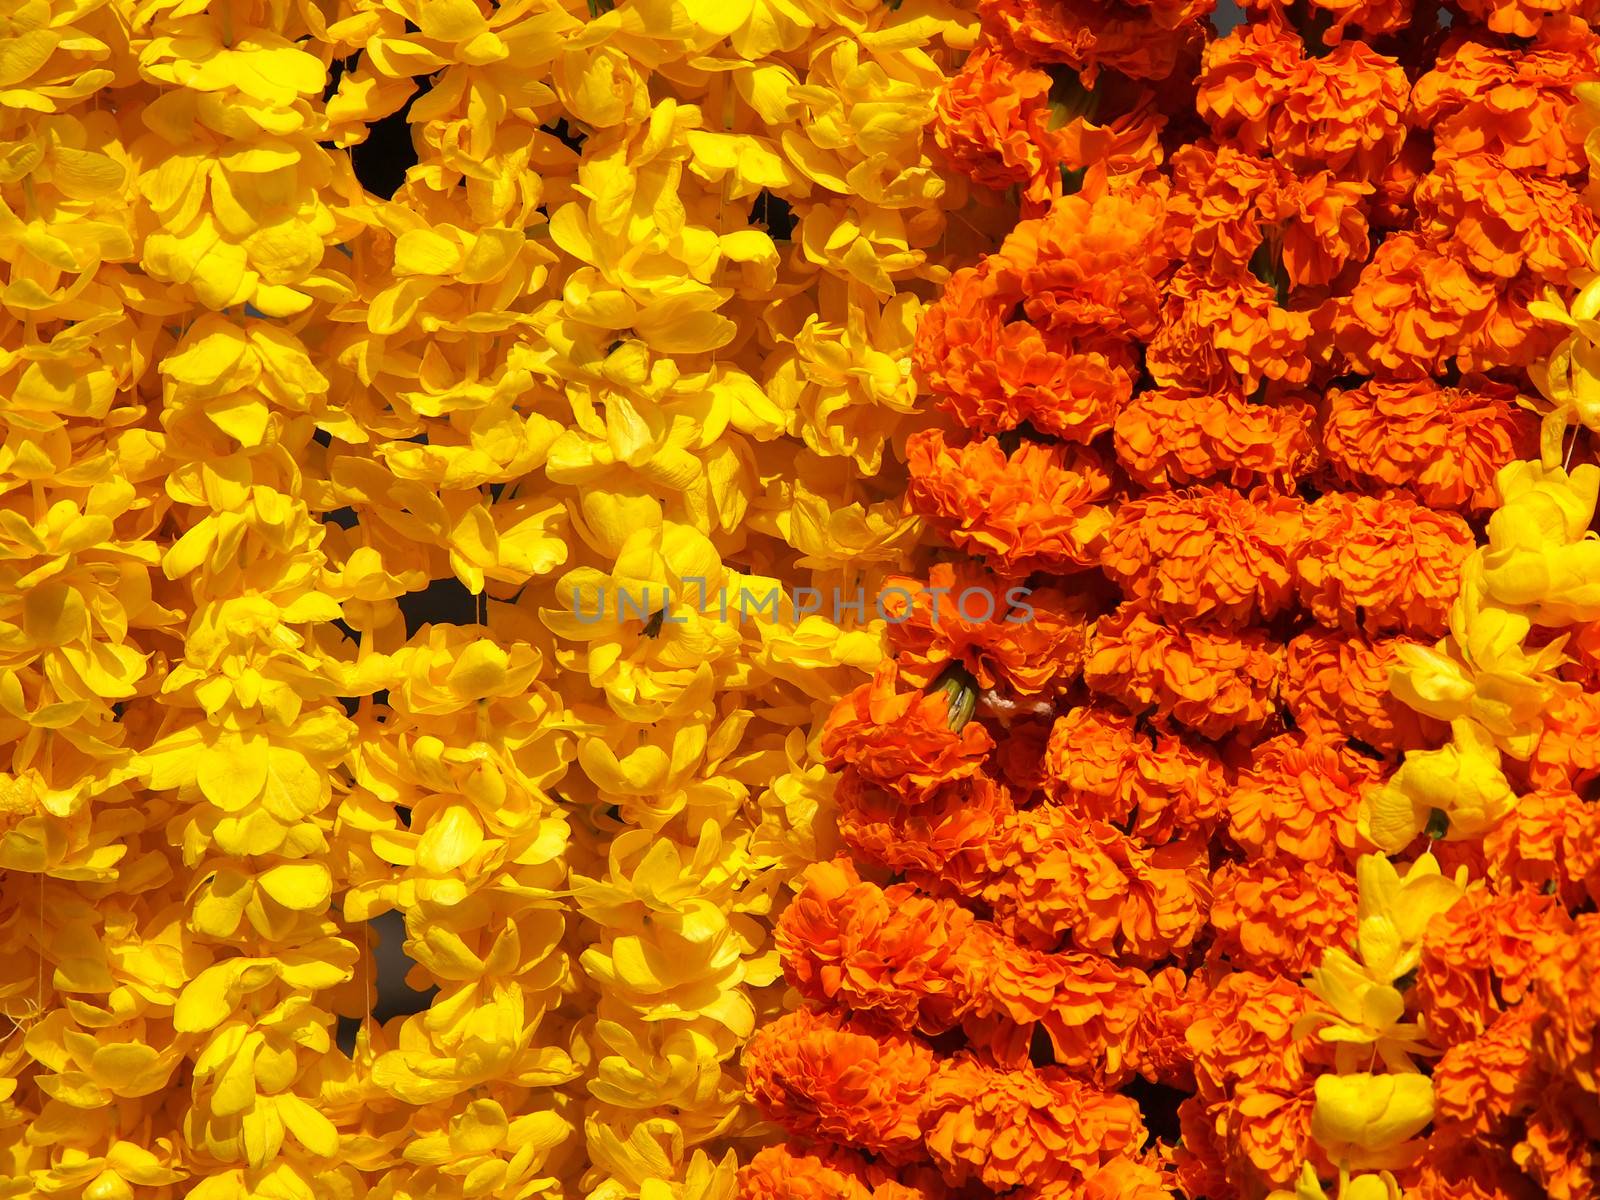 orange and yellow floral arrangement for holi festival and religious offerings in india.         